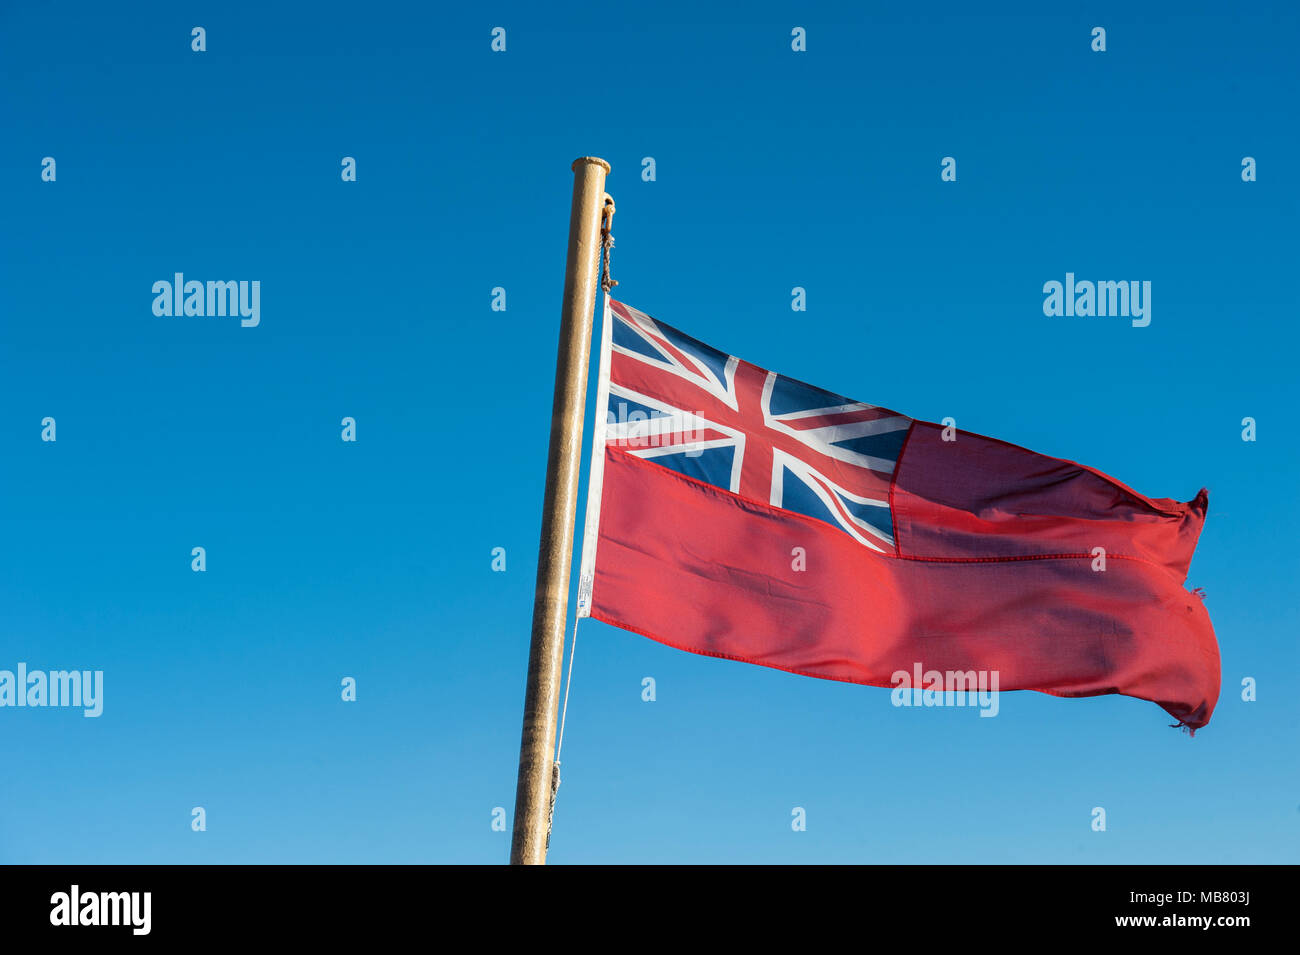 A Royal Ensign flag flies on the stern of a ship in Scotland Stock Photo